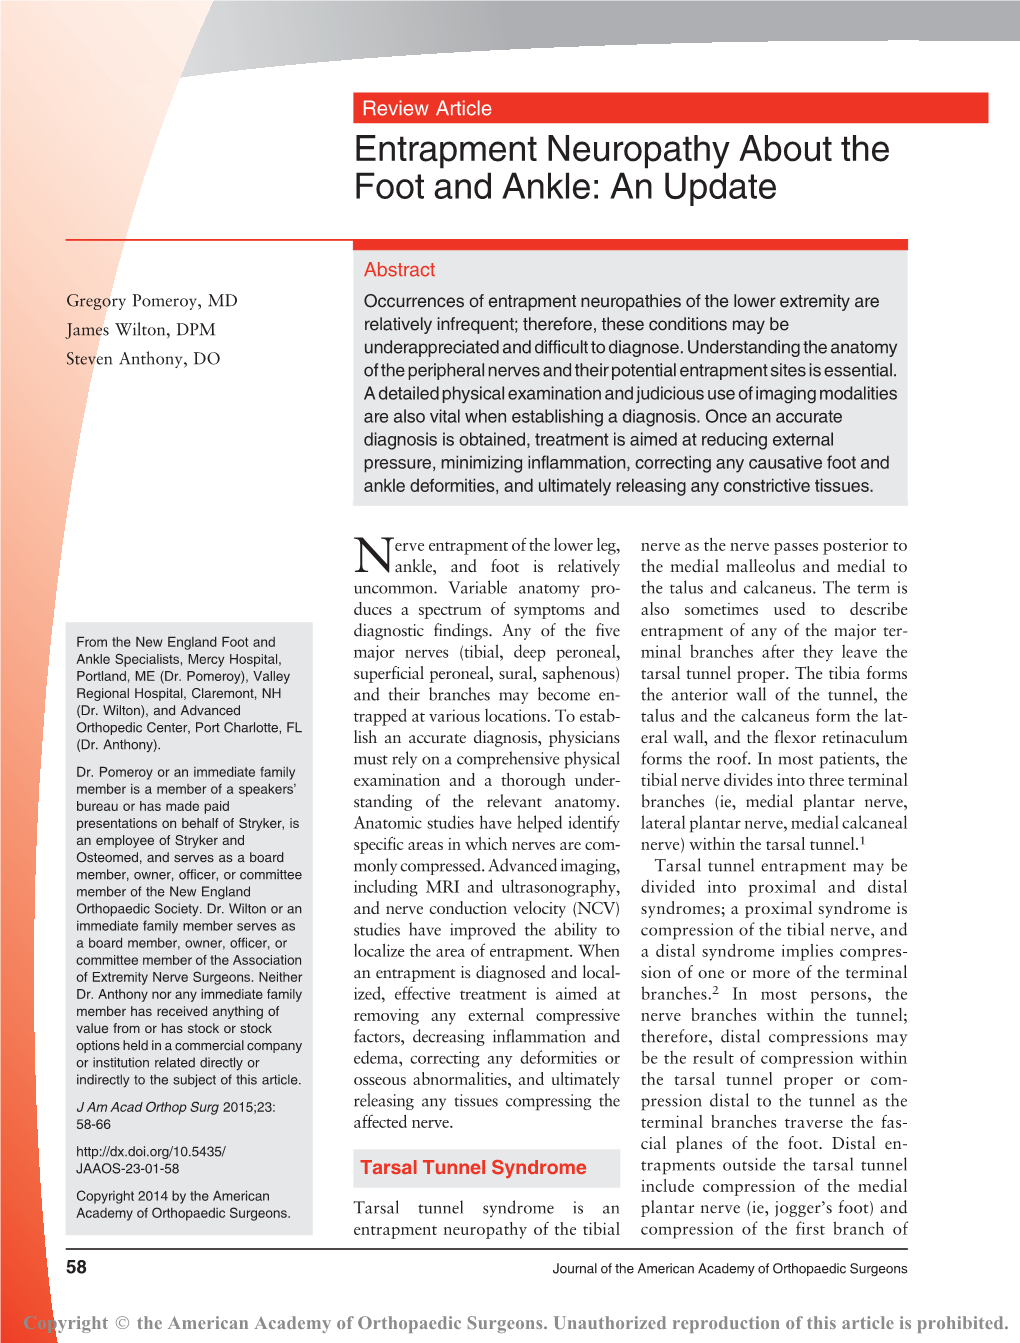 Entrapment Neuropathy About the Foot and Ankle: an Update